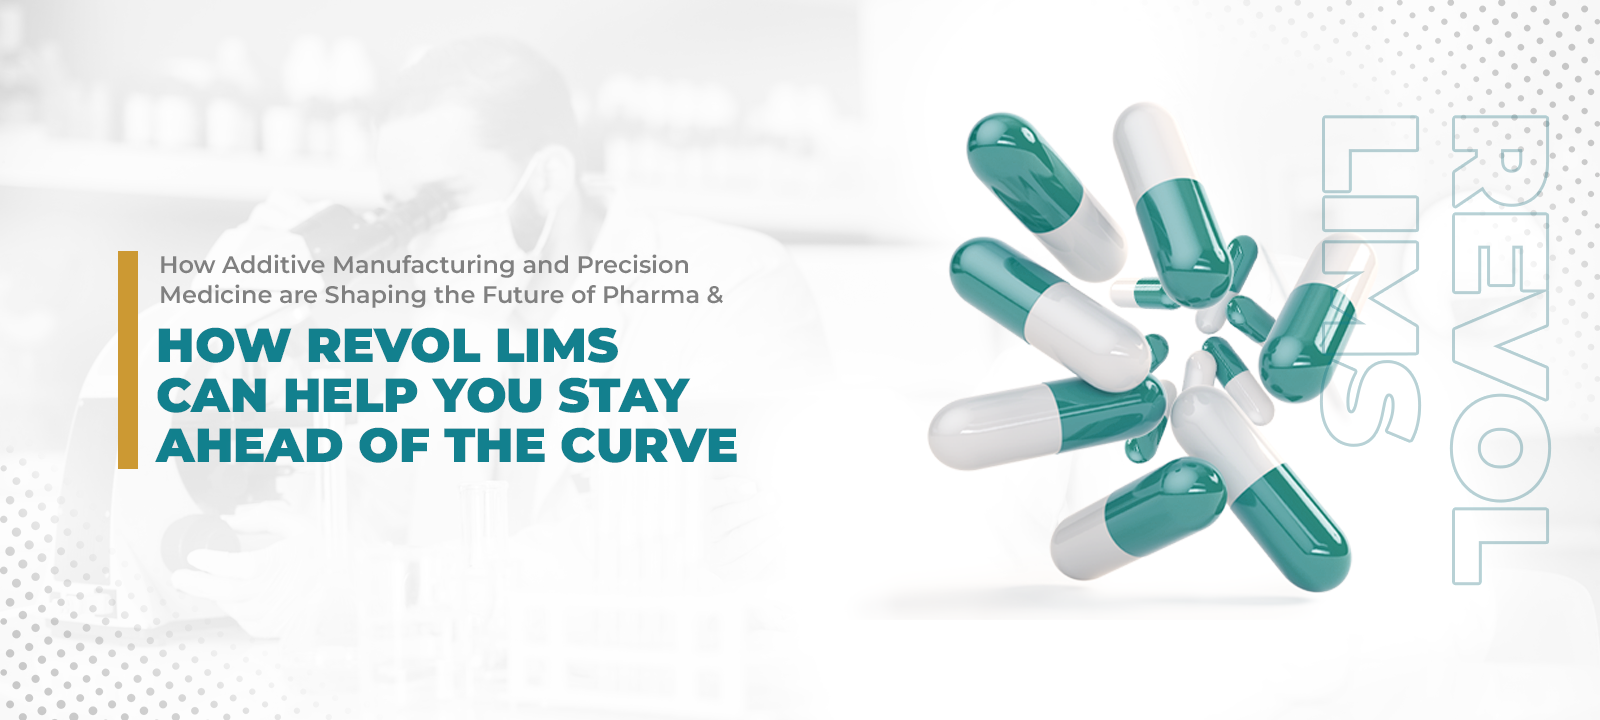 Green and white capsules on a white and green background. The text highlights the benefits of Revol LIMS and how it can help pharma companies stay ahead of the curve.